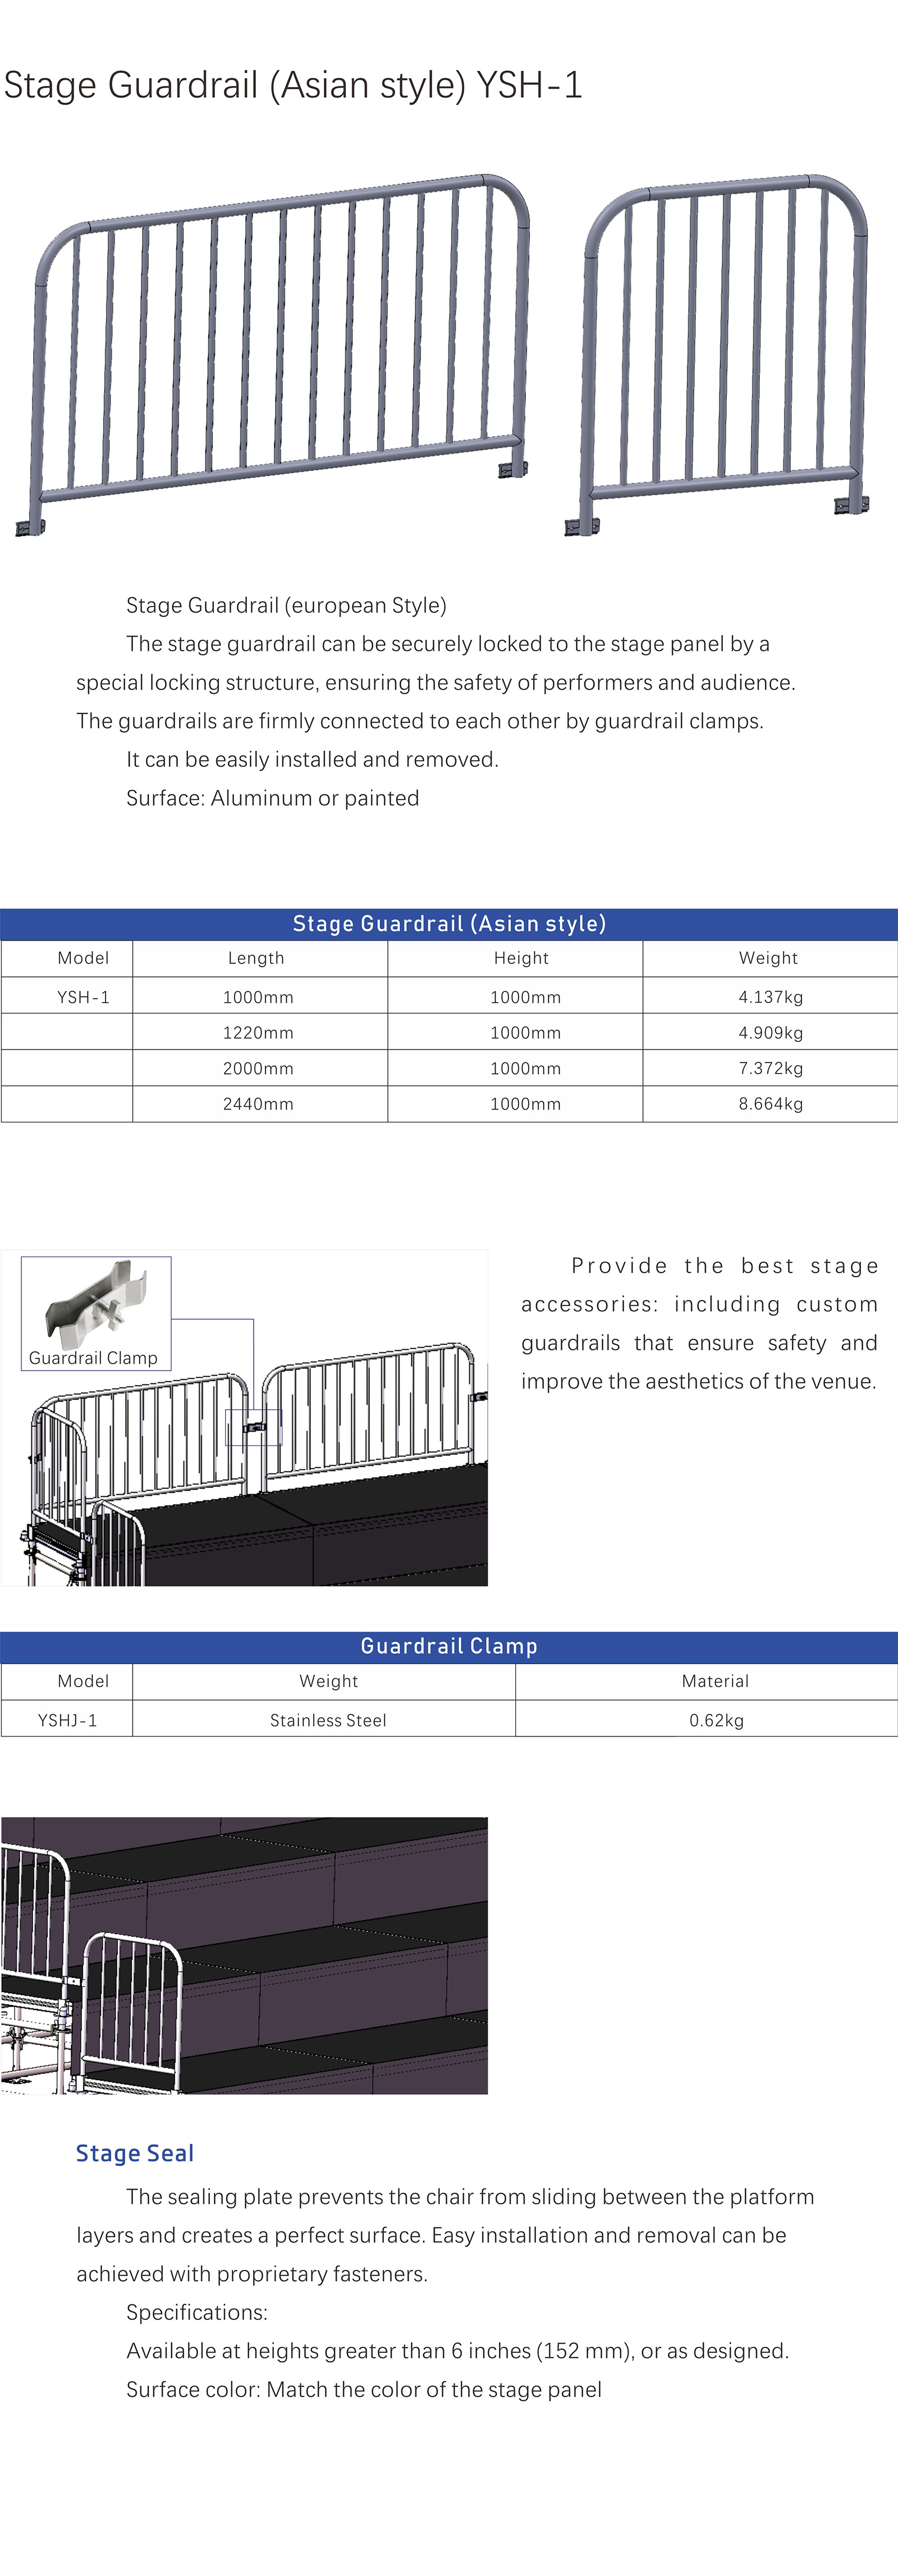 Stage Guardrail (Asian style) YSH-1